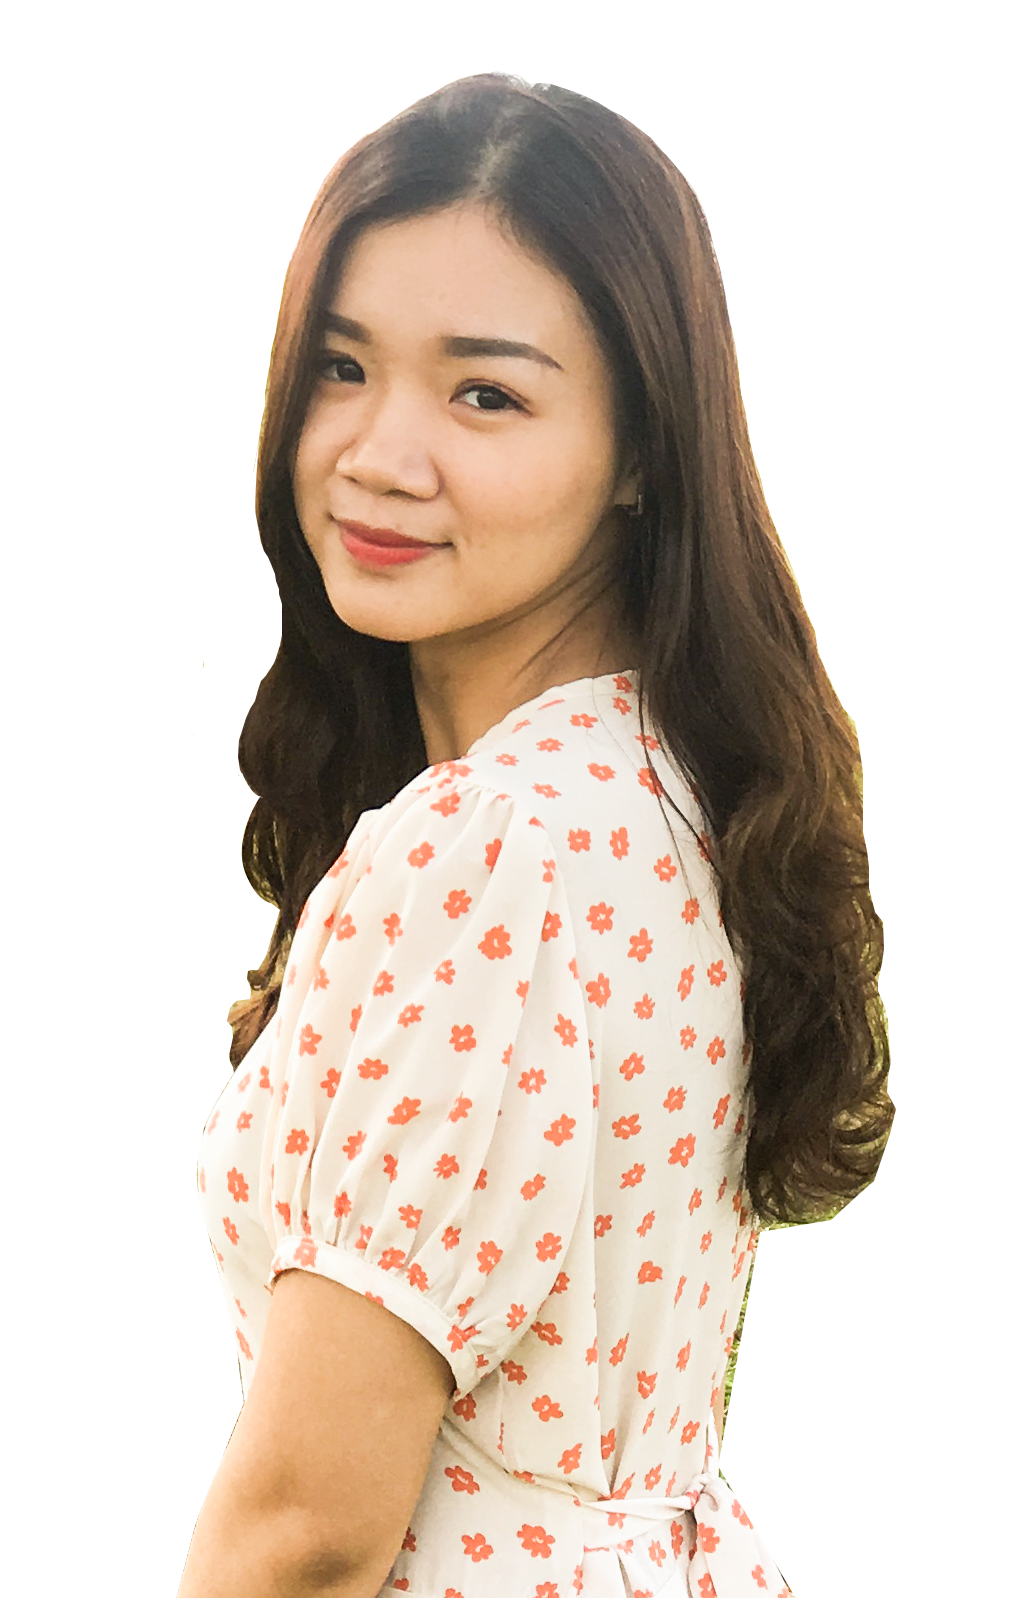 About – Thu Thuy Le – Medium